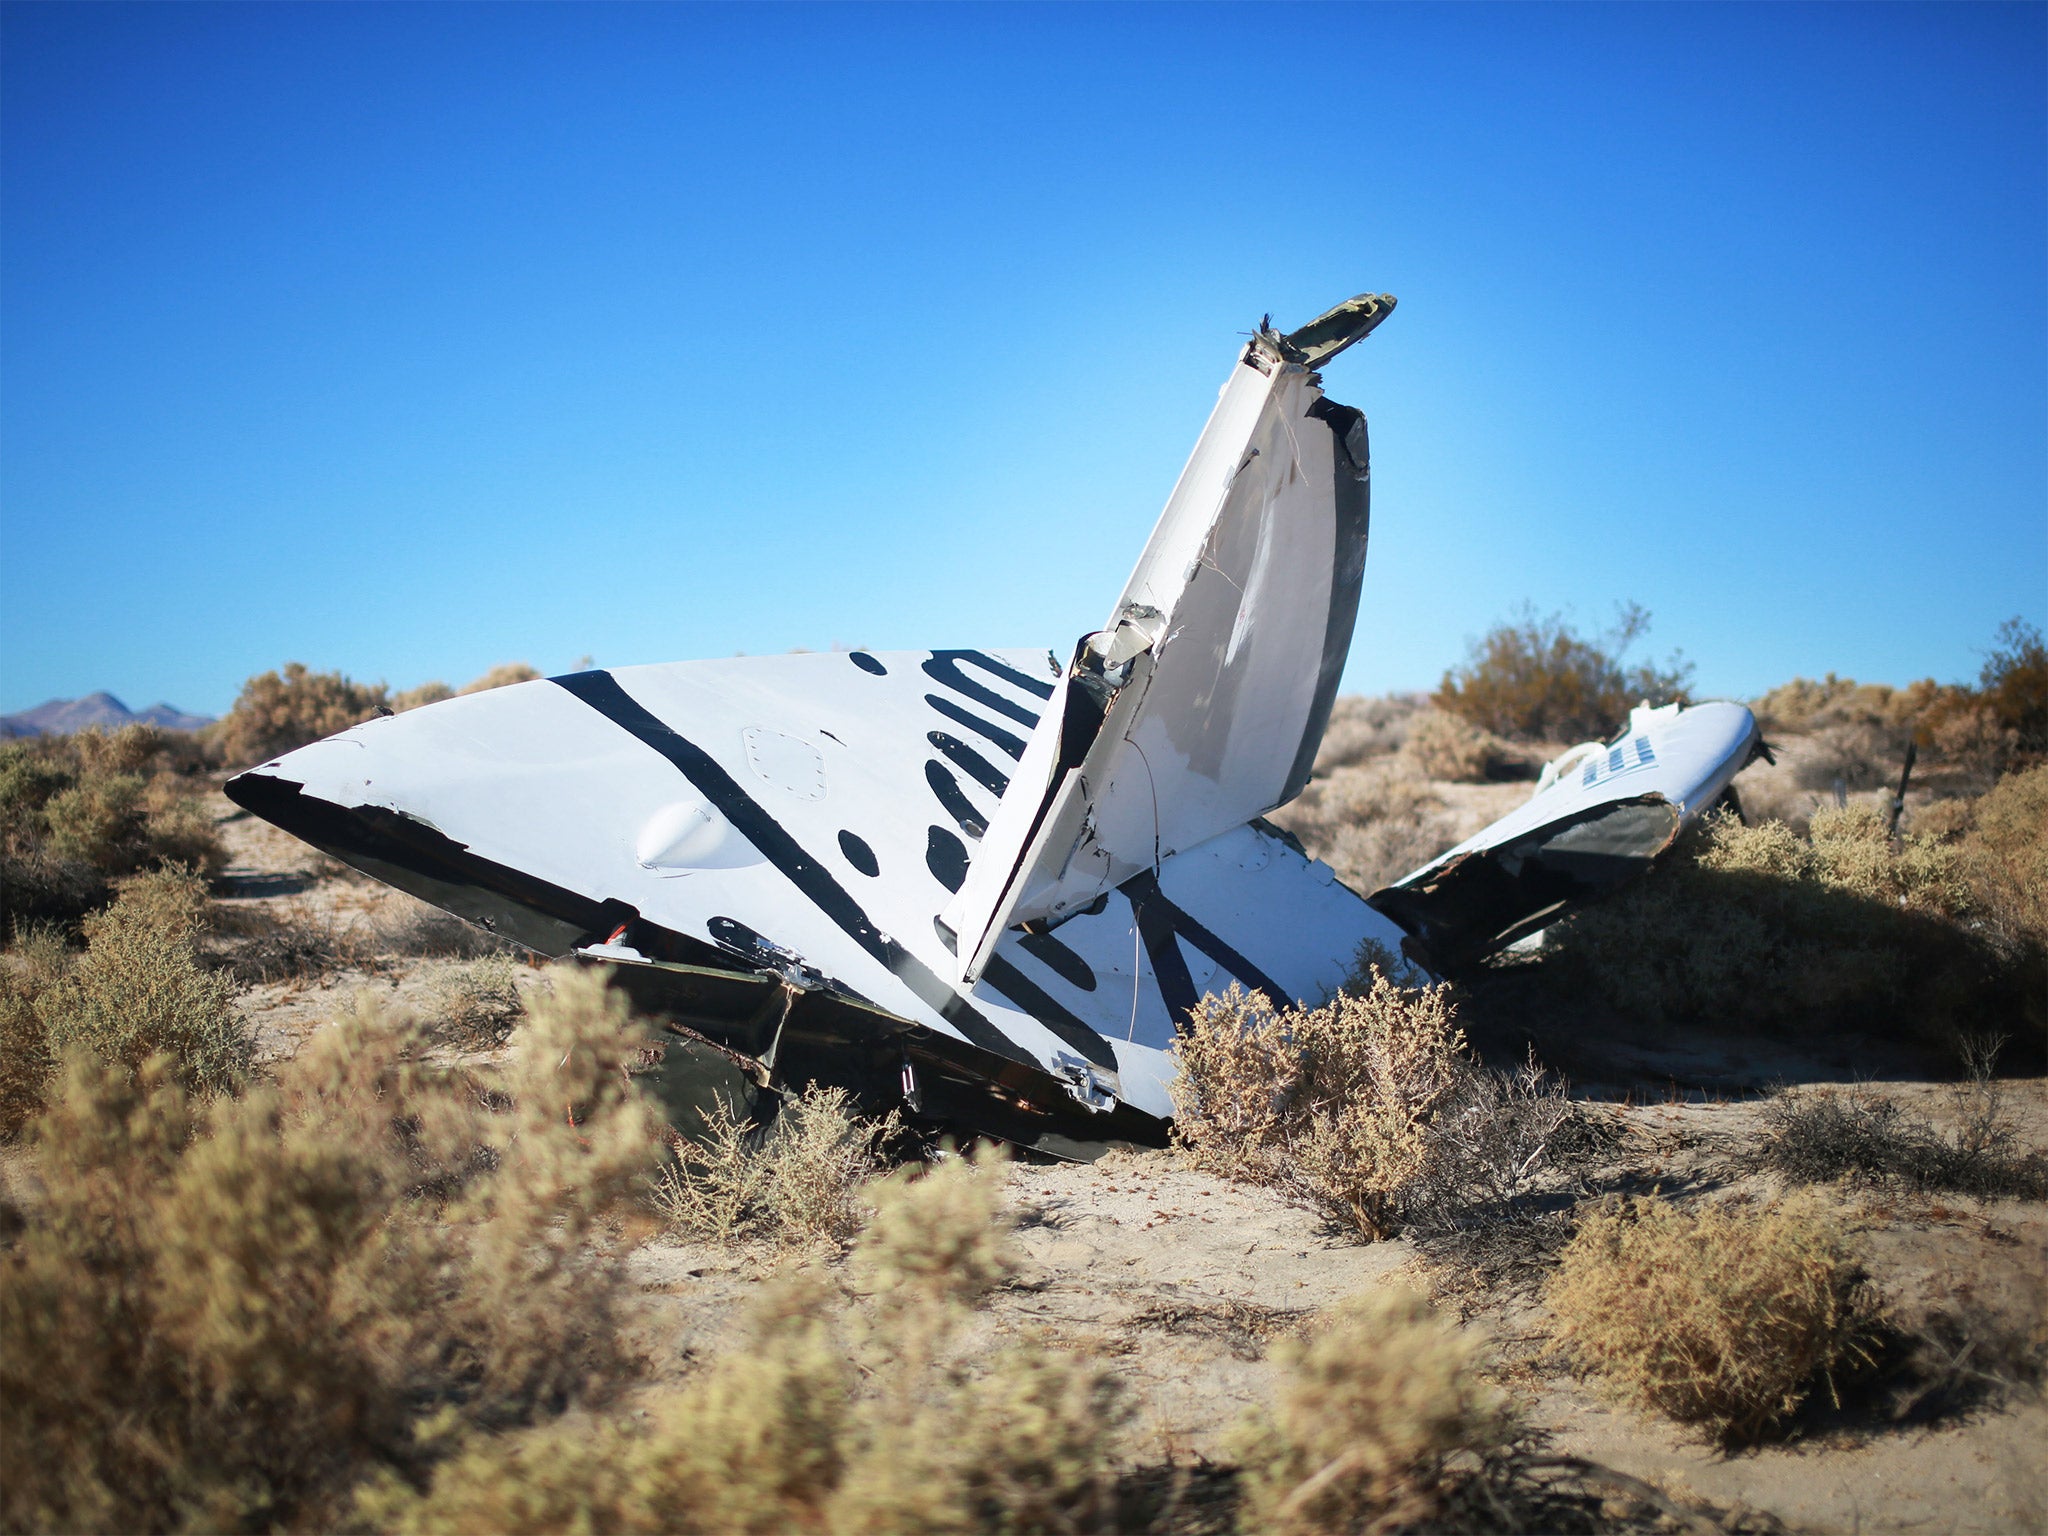 SpaceShipTwo crashed during a test flight, killing one pilot and seriously injuring another